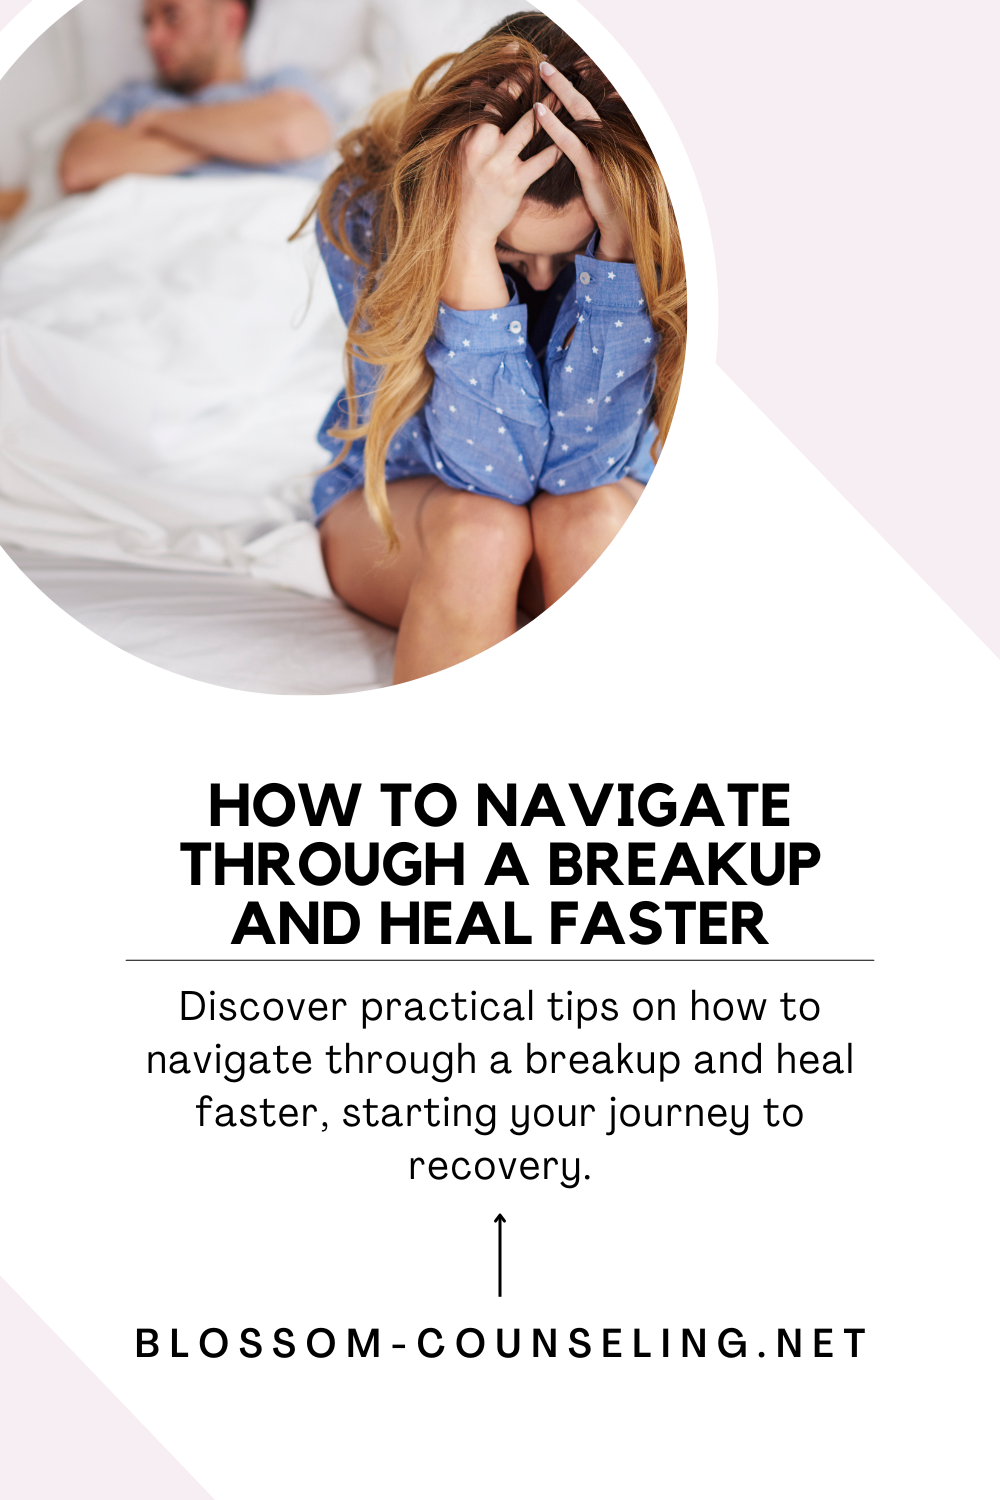 How to Navigate Through a Breakup and Heal Faster